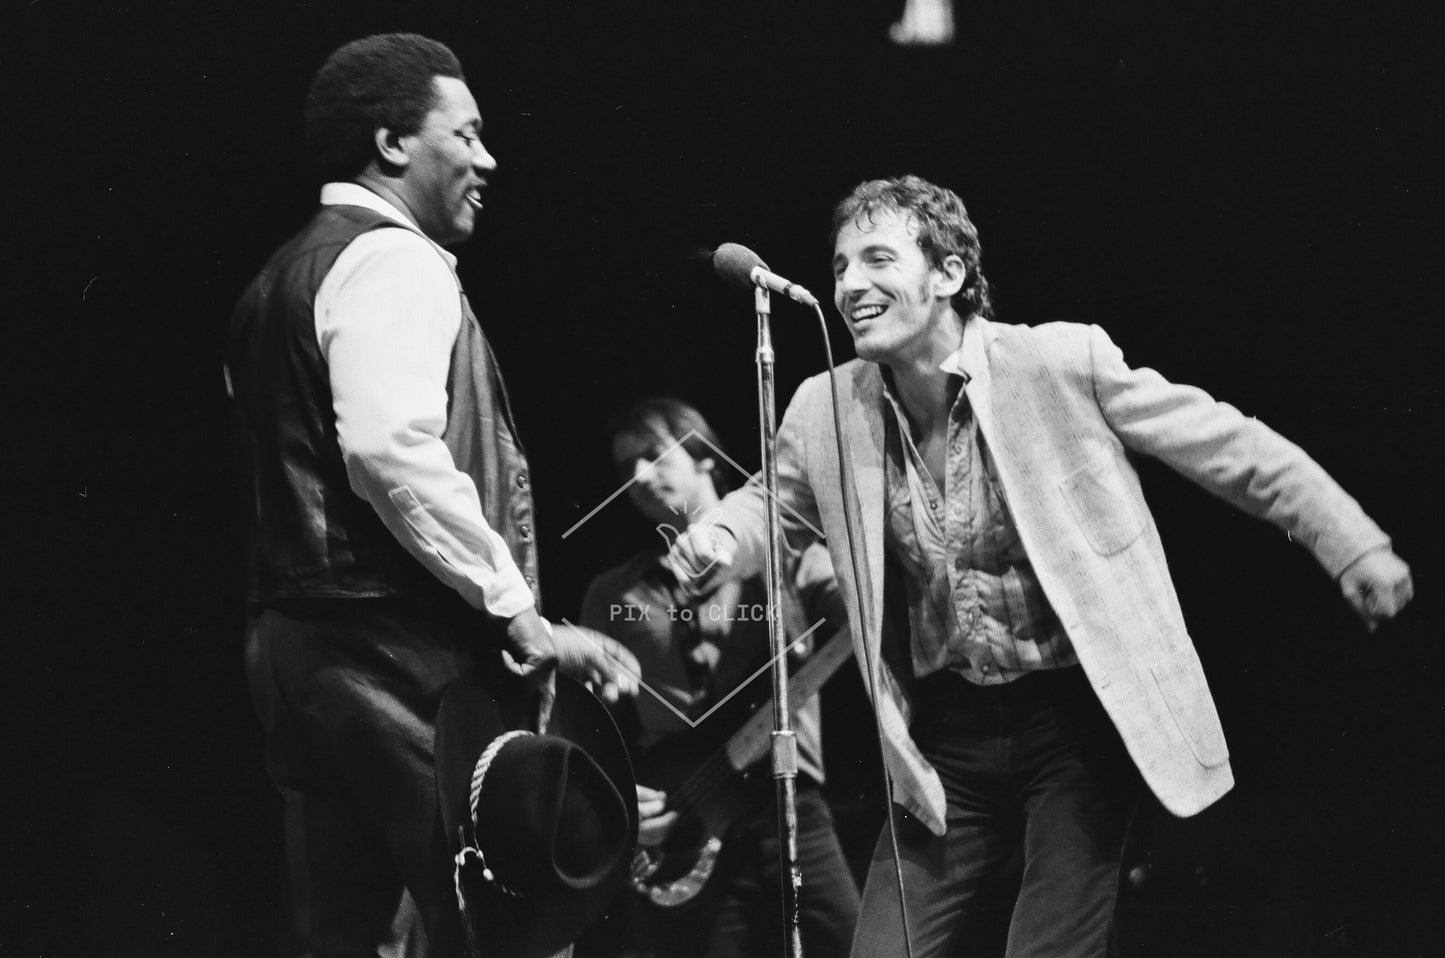 Bruce Springsteen, Clarence Clemons and Garry Tallent - Madison Square Garden - New York City - November 27, 1980